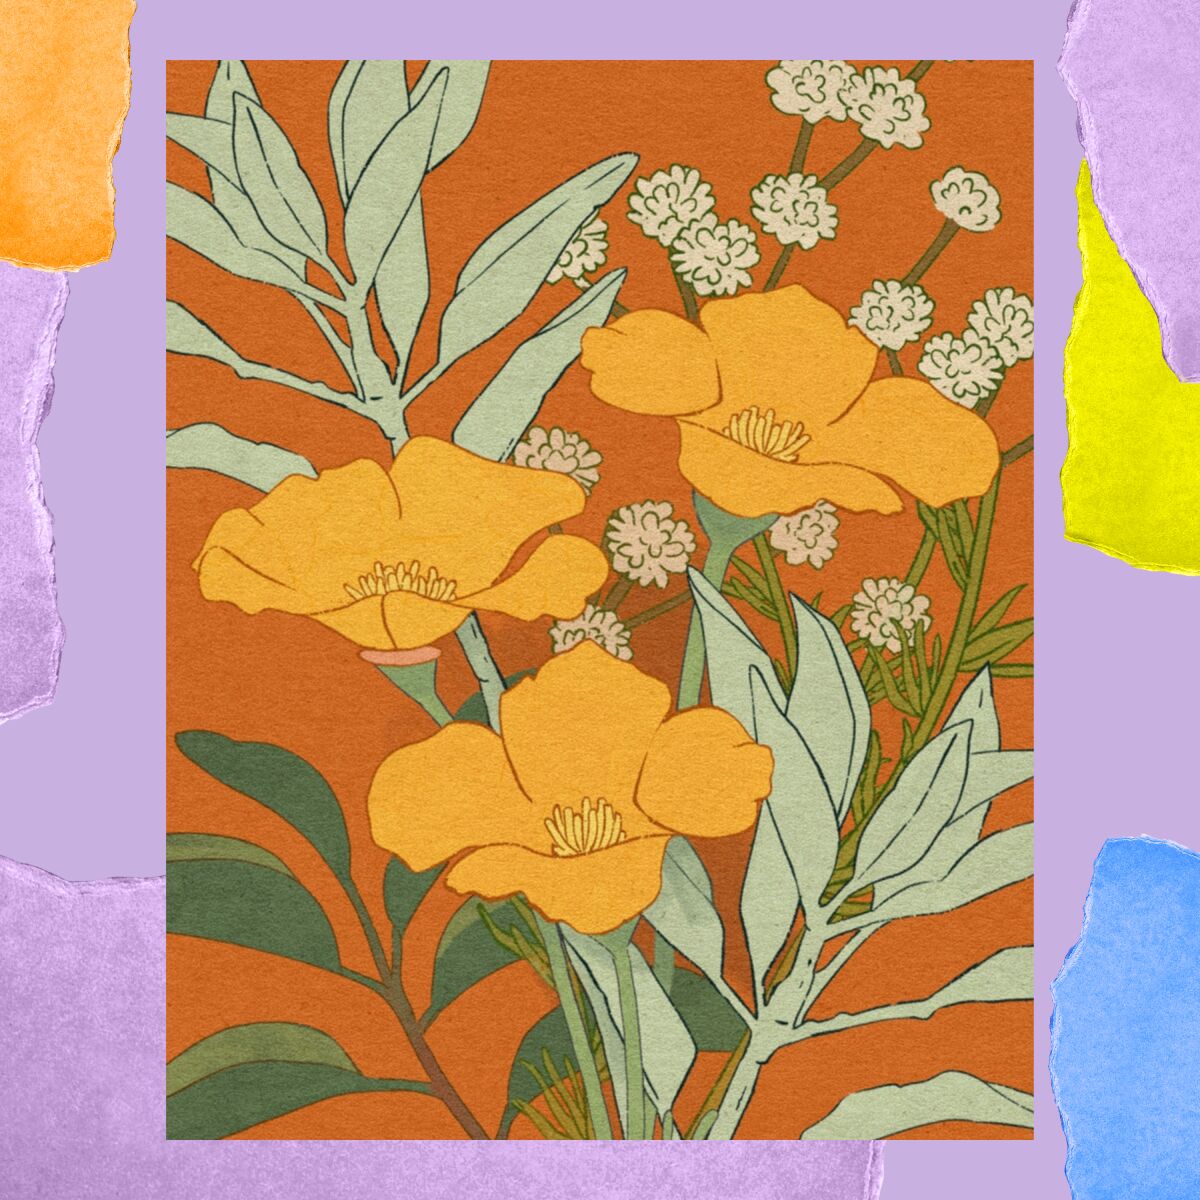 An illustration of wildflowers.